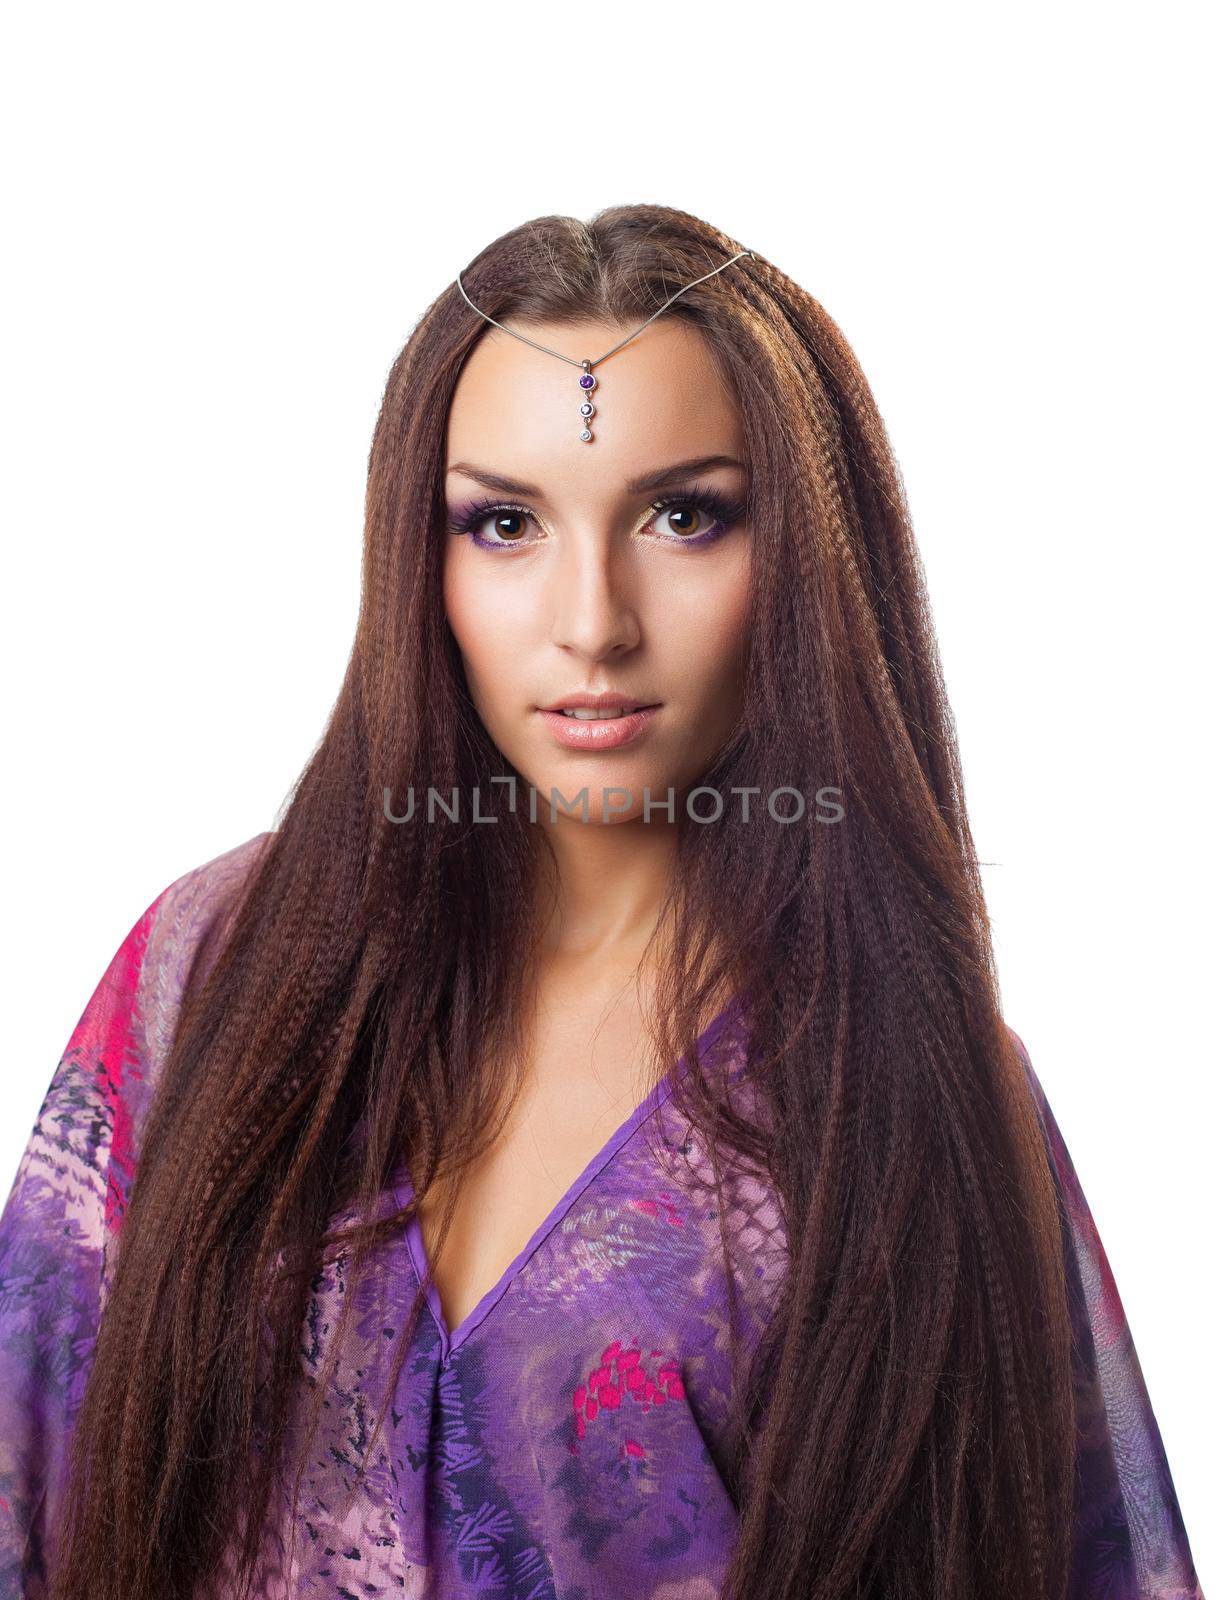 Cute woman portrait in indi style cloth and bindi by rivertime